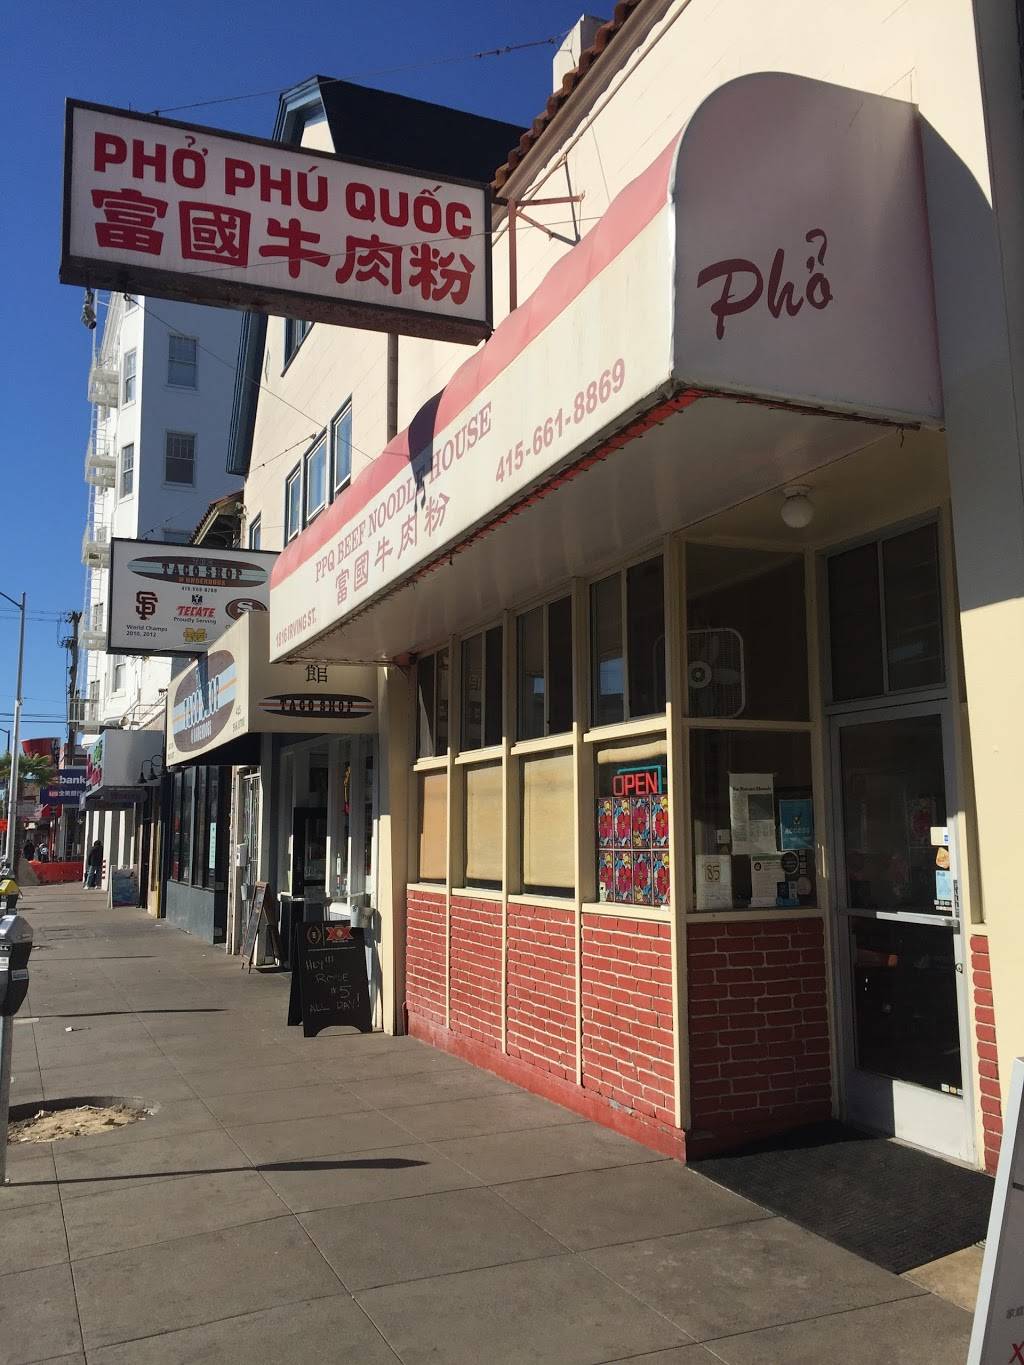 PPQ Beef Noodle House | restaurant | 1816 Irving St, San Francisco, CA 94122, USA | 4156618869 OR +1 415-661-8869